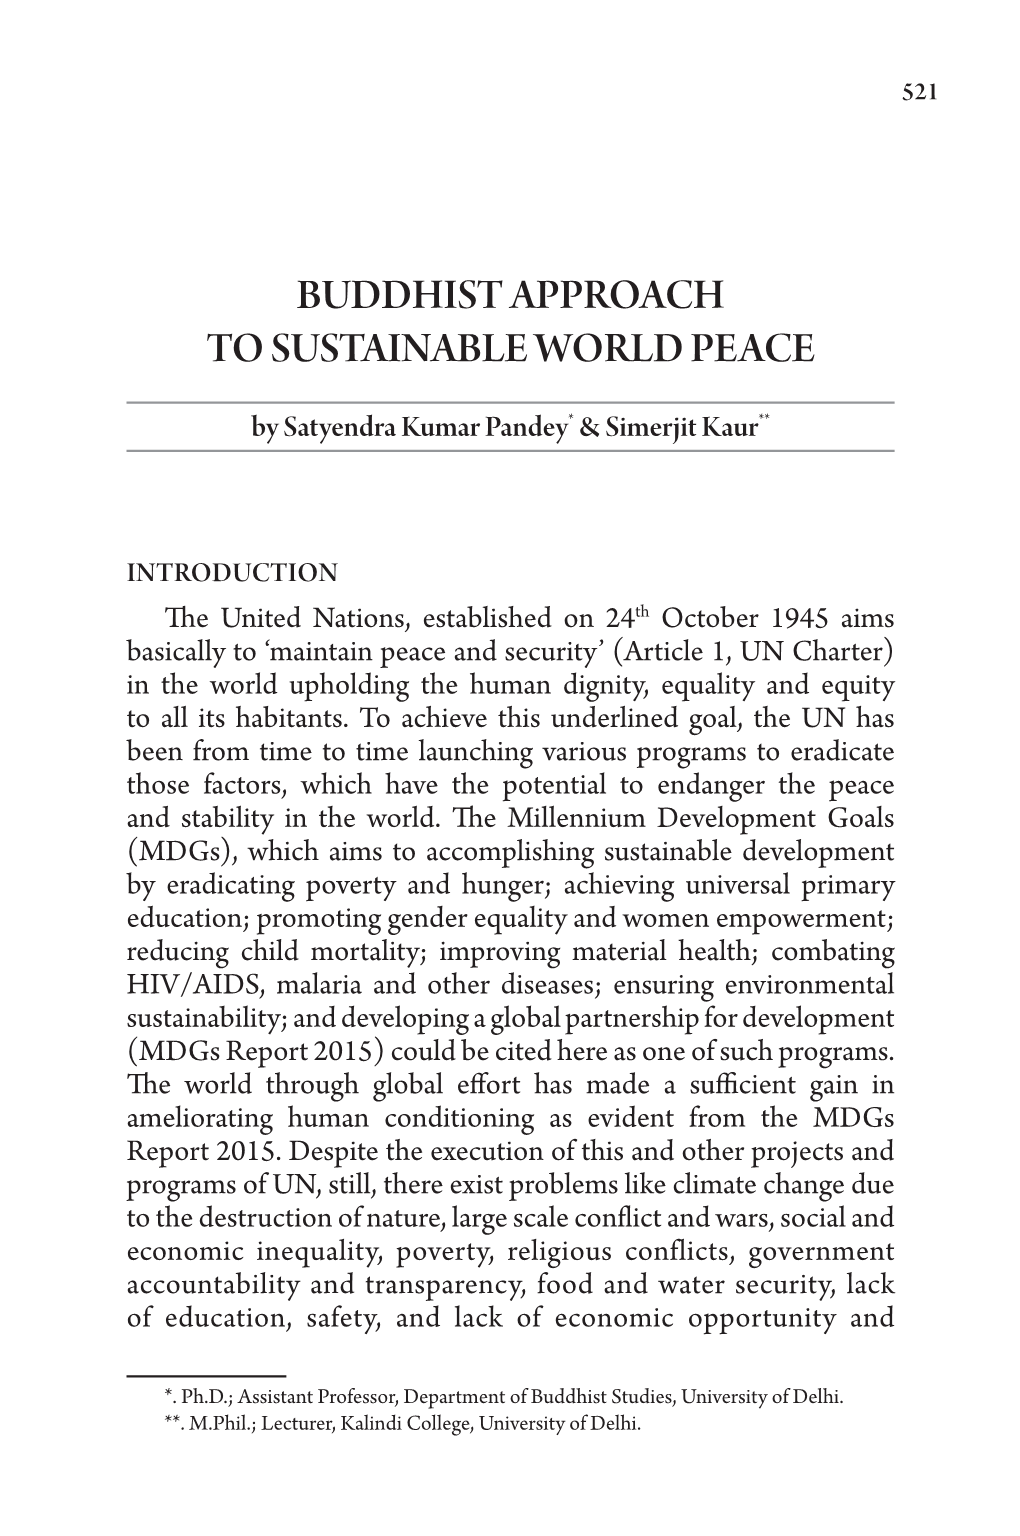 Buddhist Approach to Sustainable World Peace